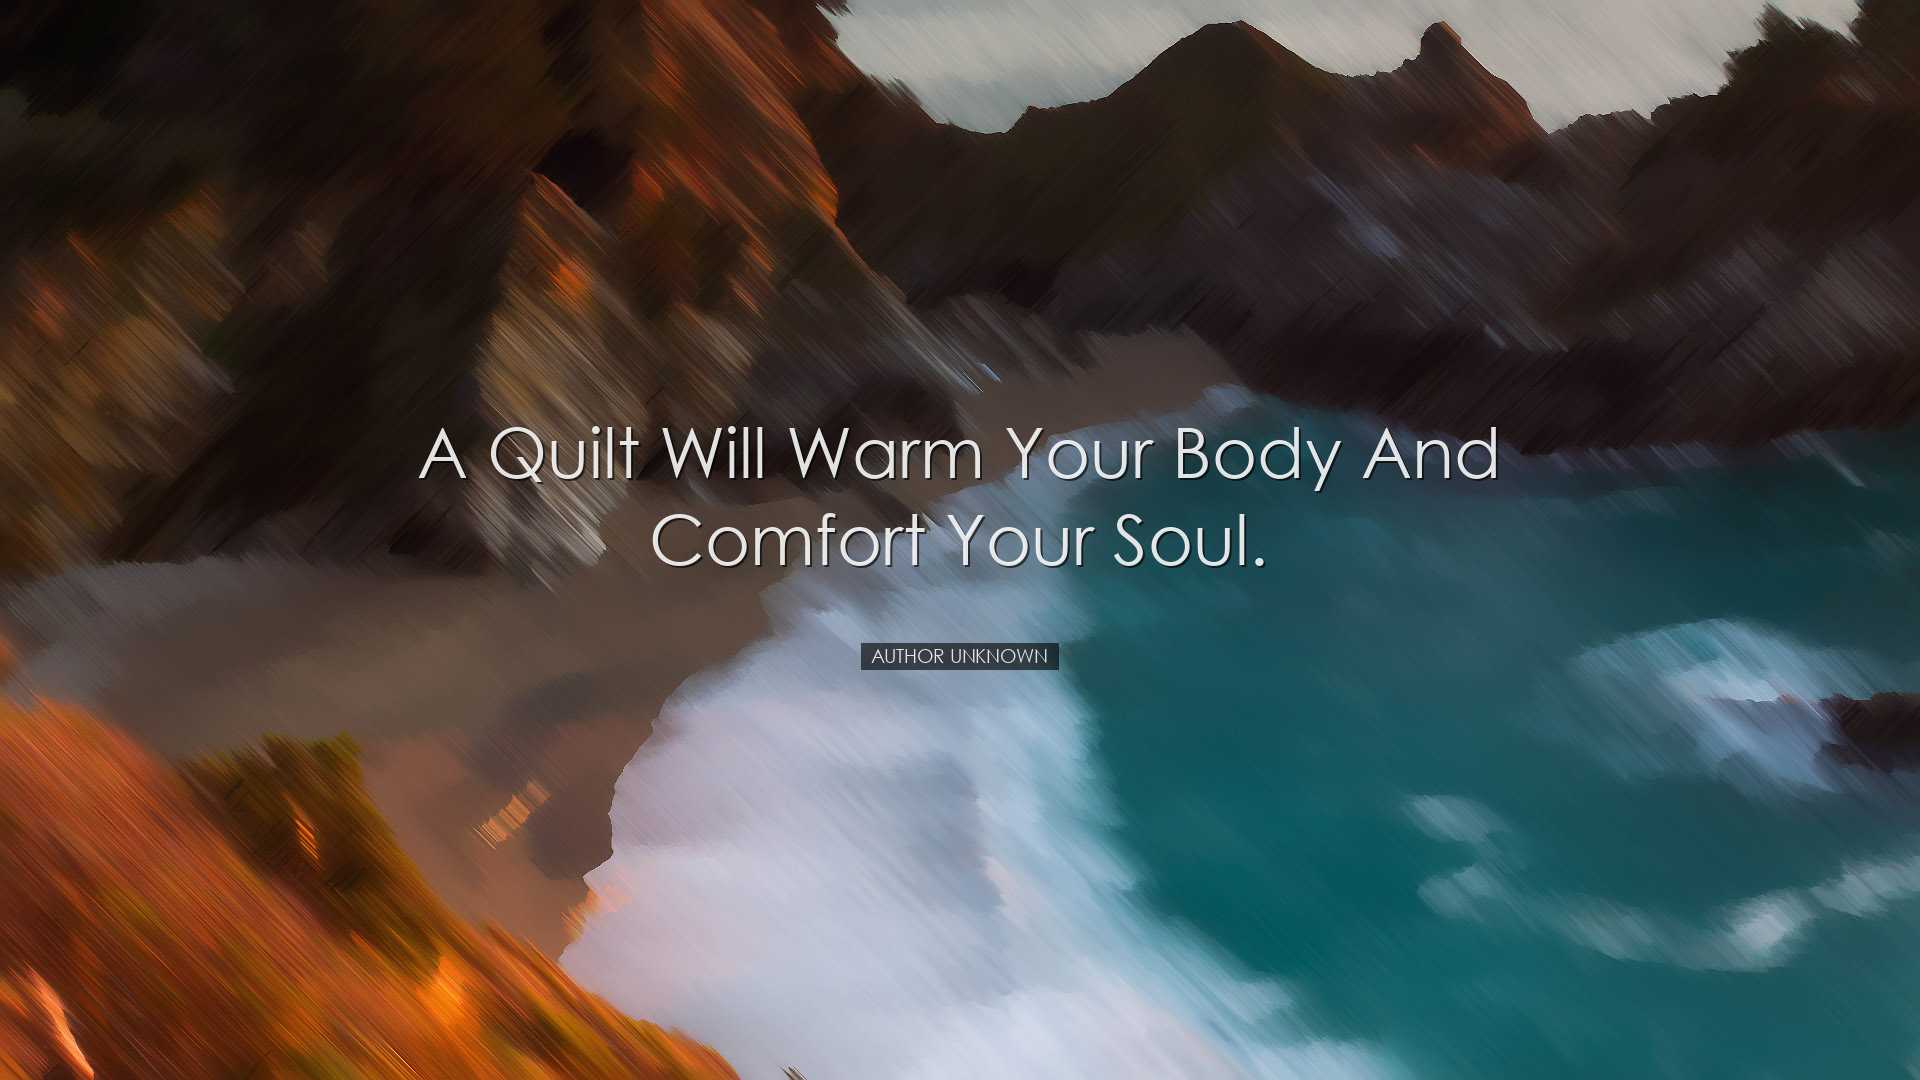 A quilt will warm your body and comfort your soul. - Author Unknow